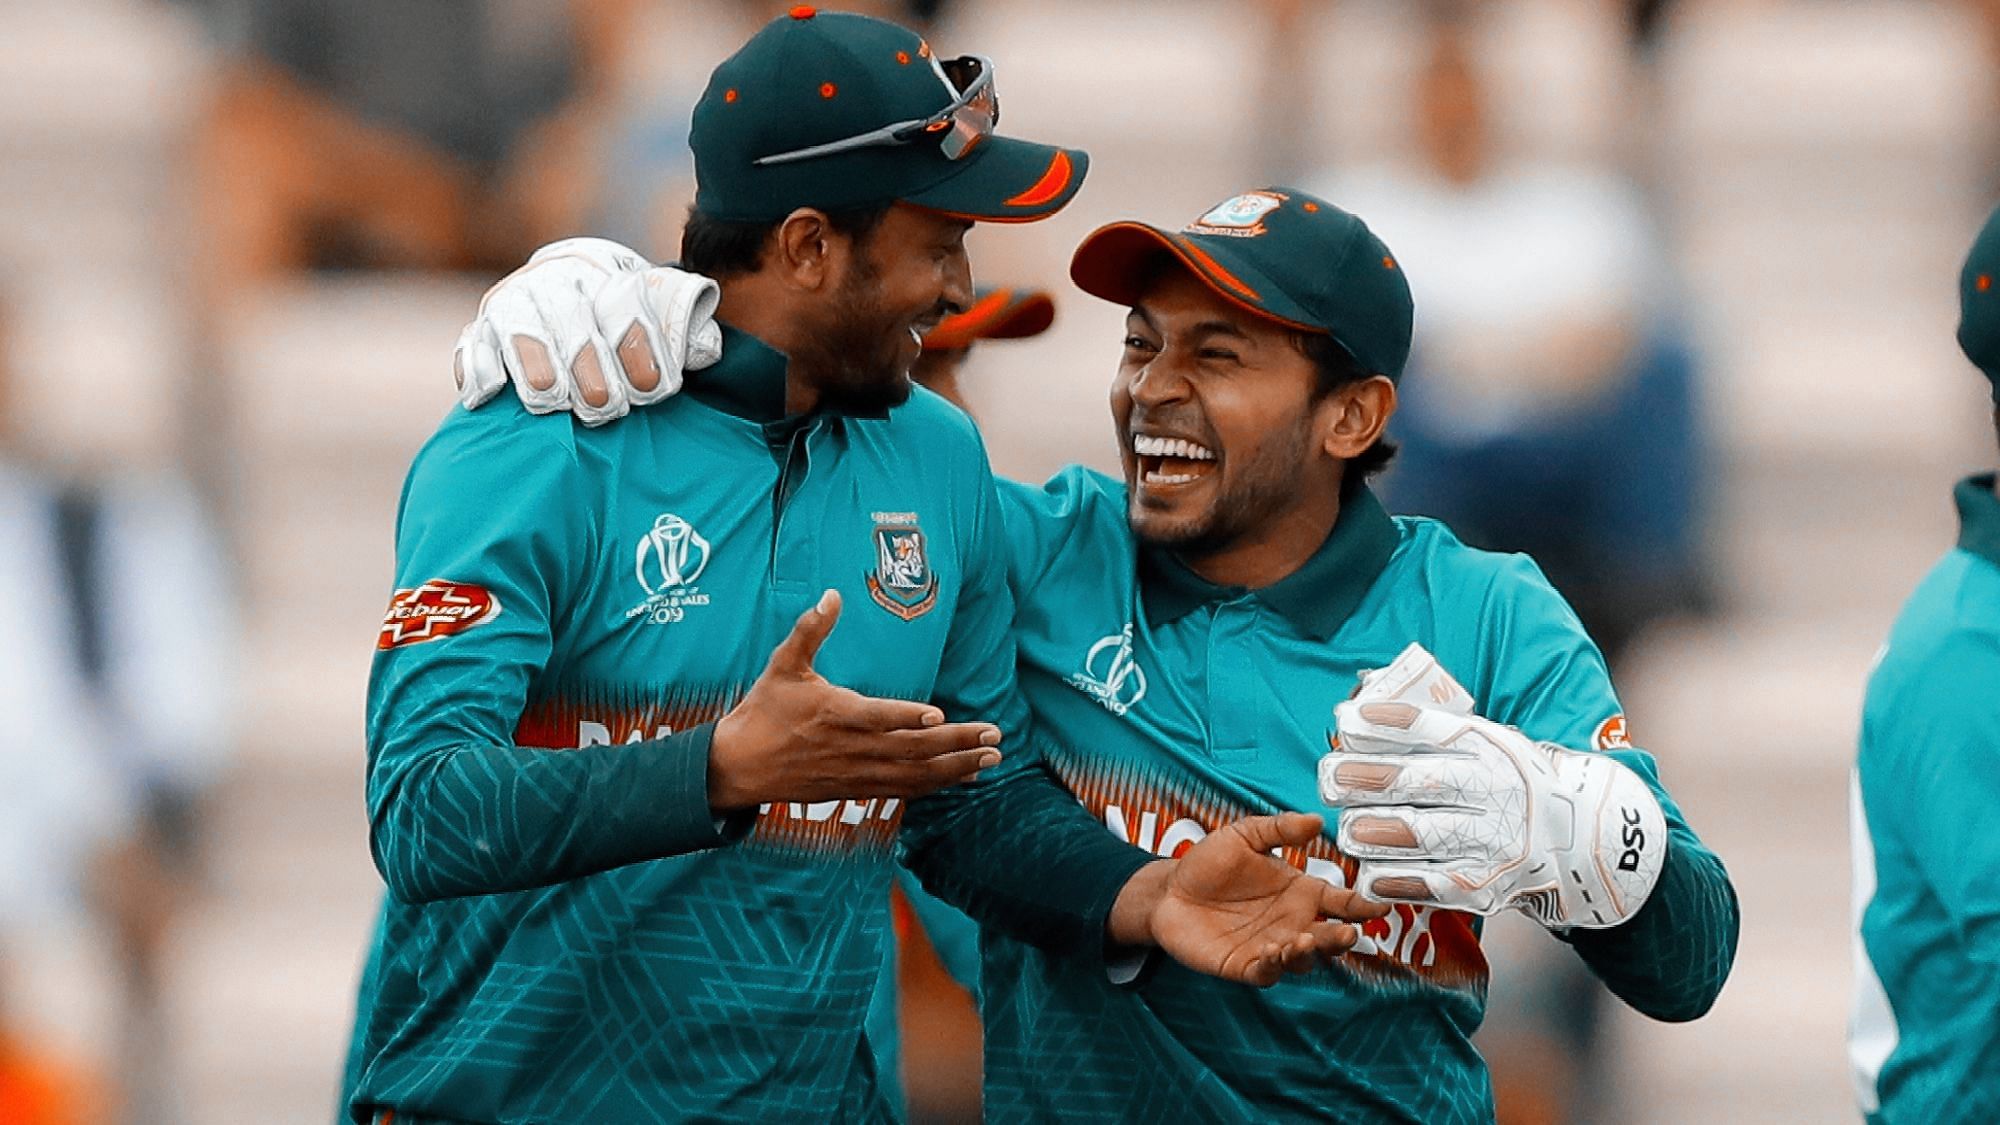 Shakib Al Hasan and Mushfiqur Rahim have together scored 803 runs for Bangladesh in the ongoing World Cup in England and Wales.